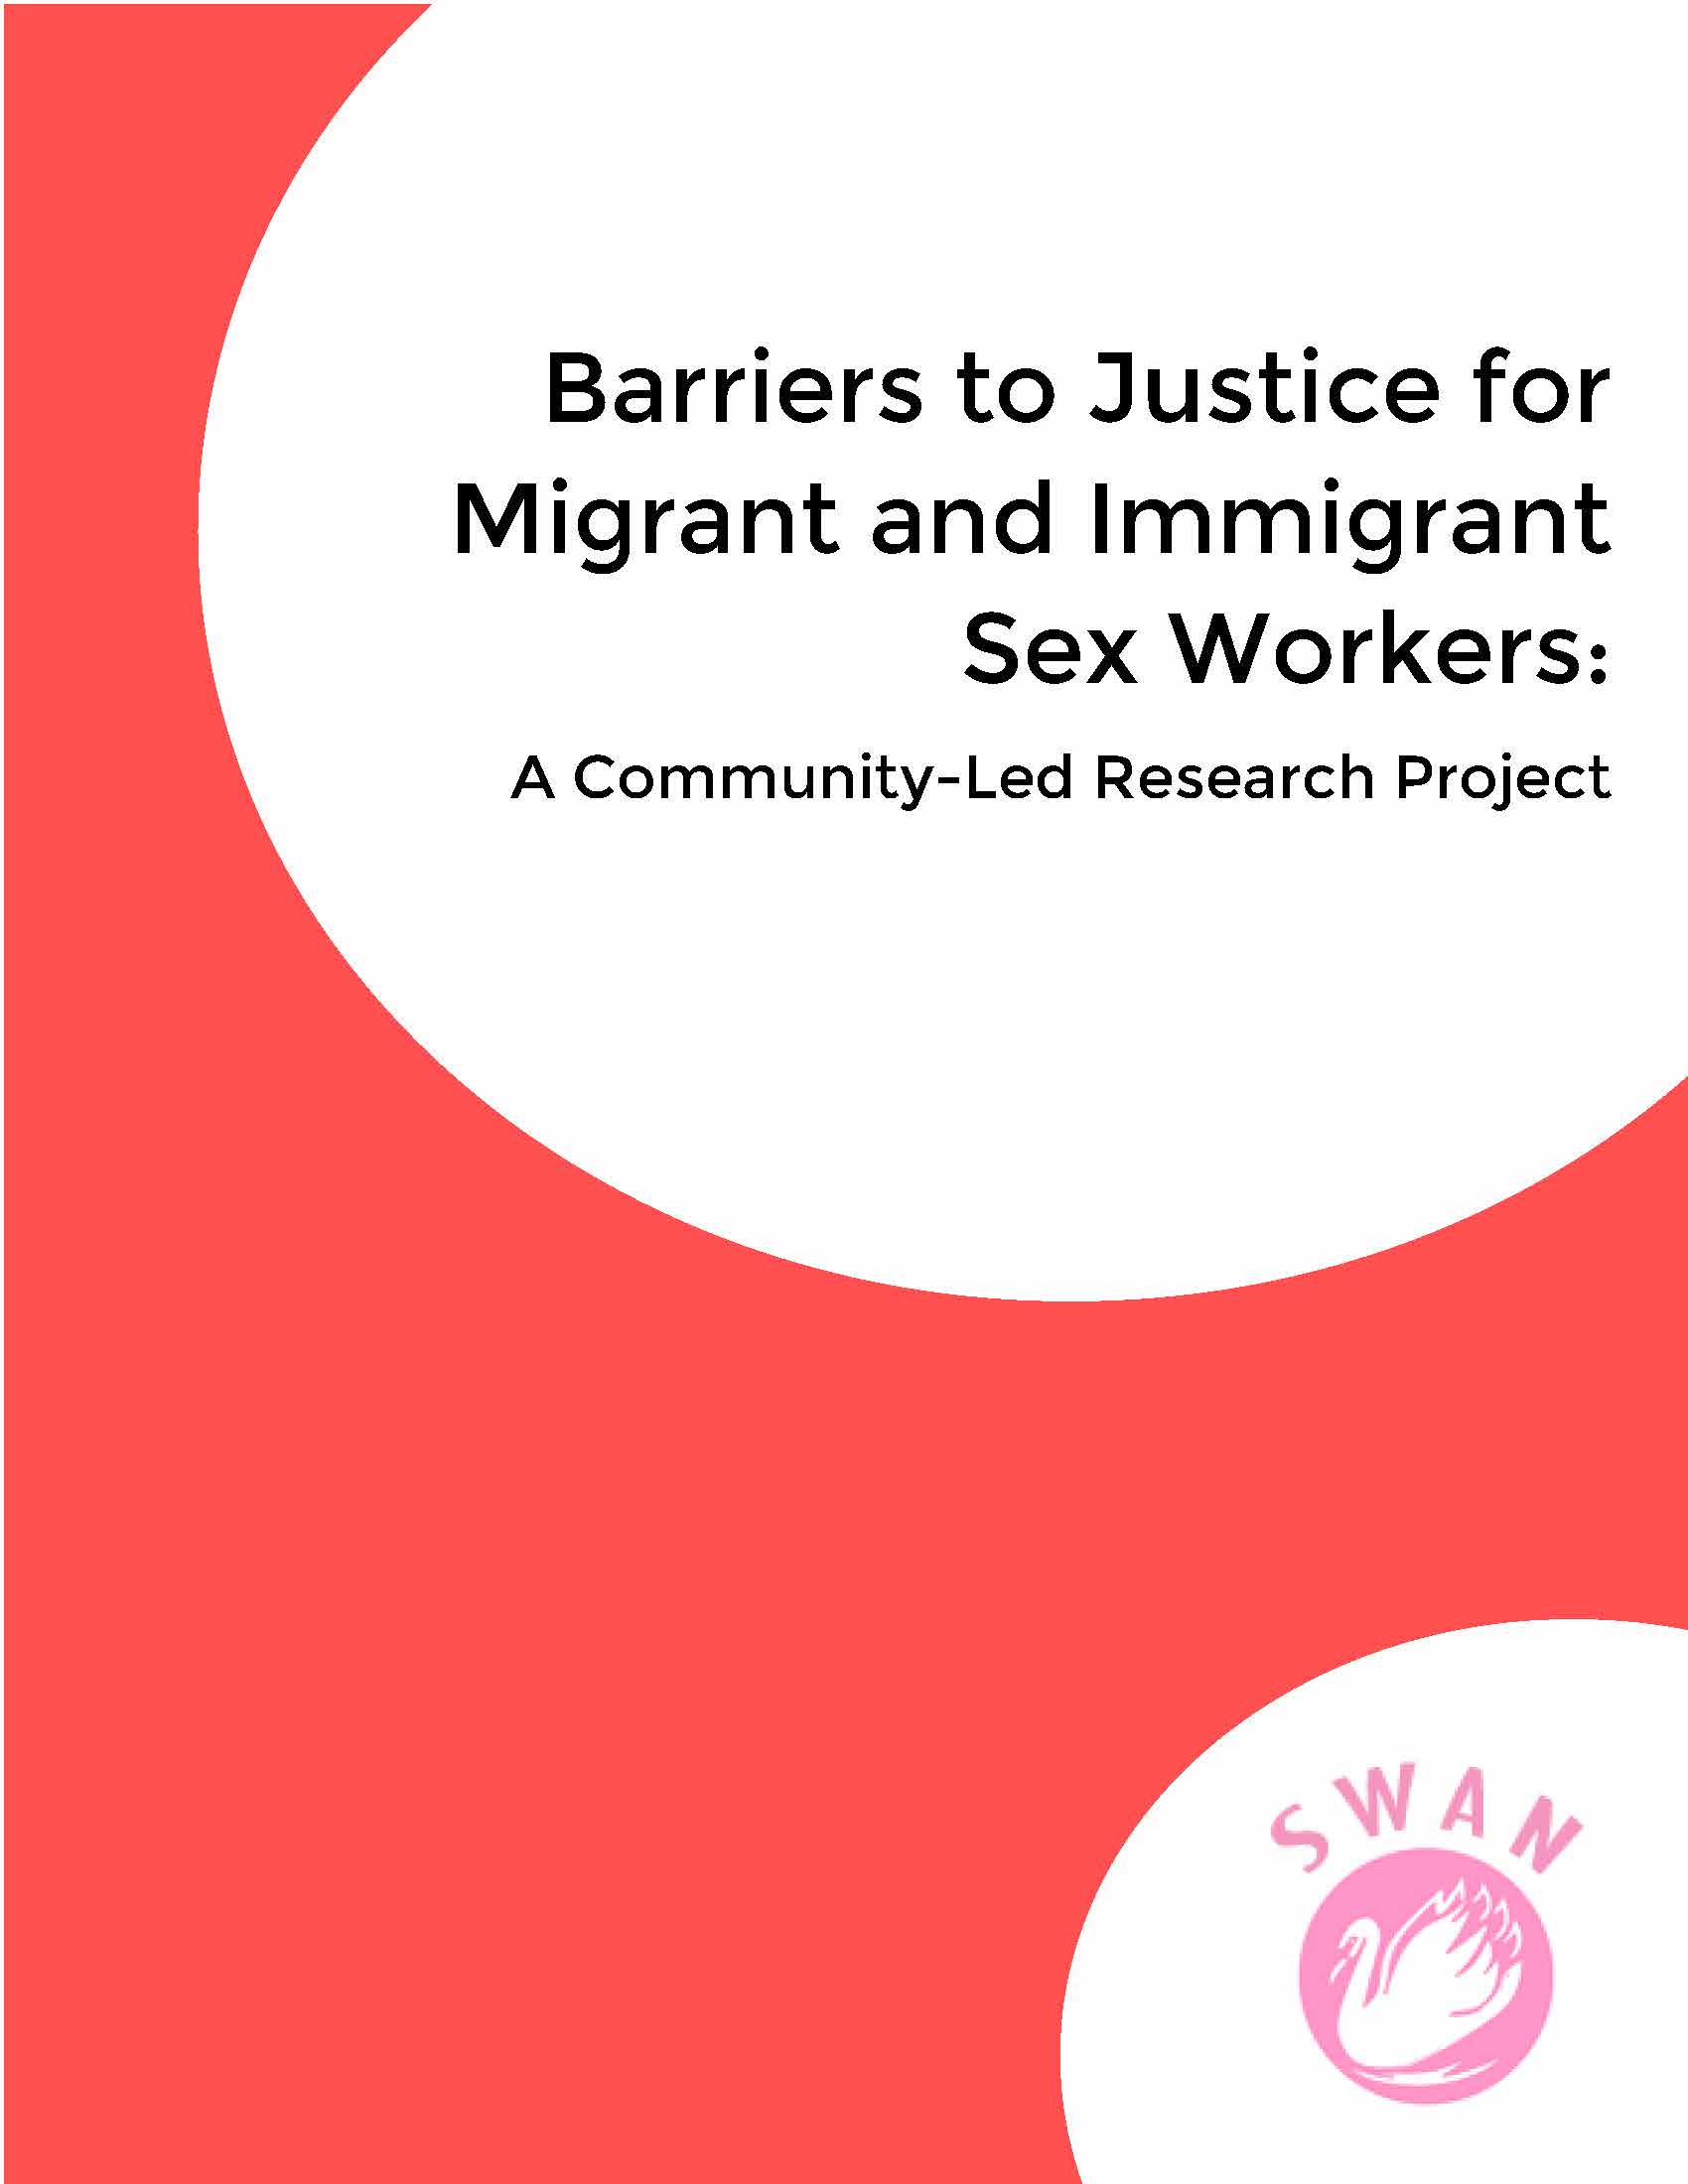 Barriers to Justice for Migrant and Immigrant Sex Workers